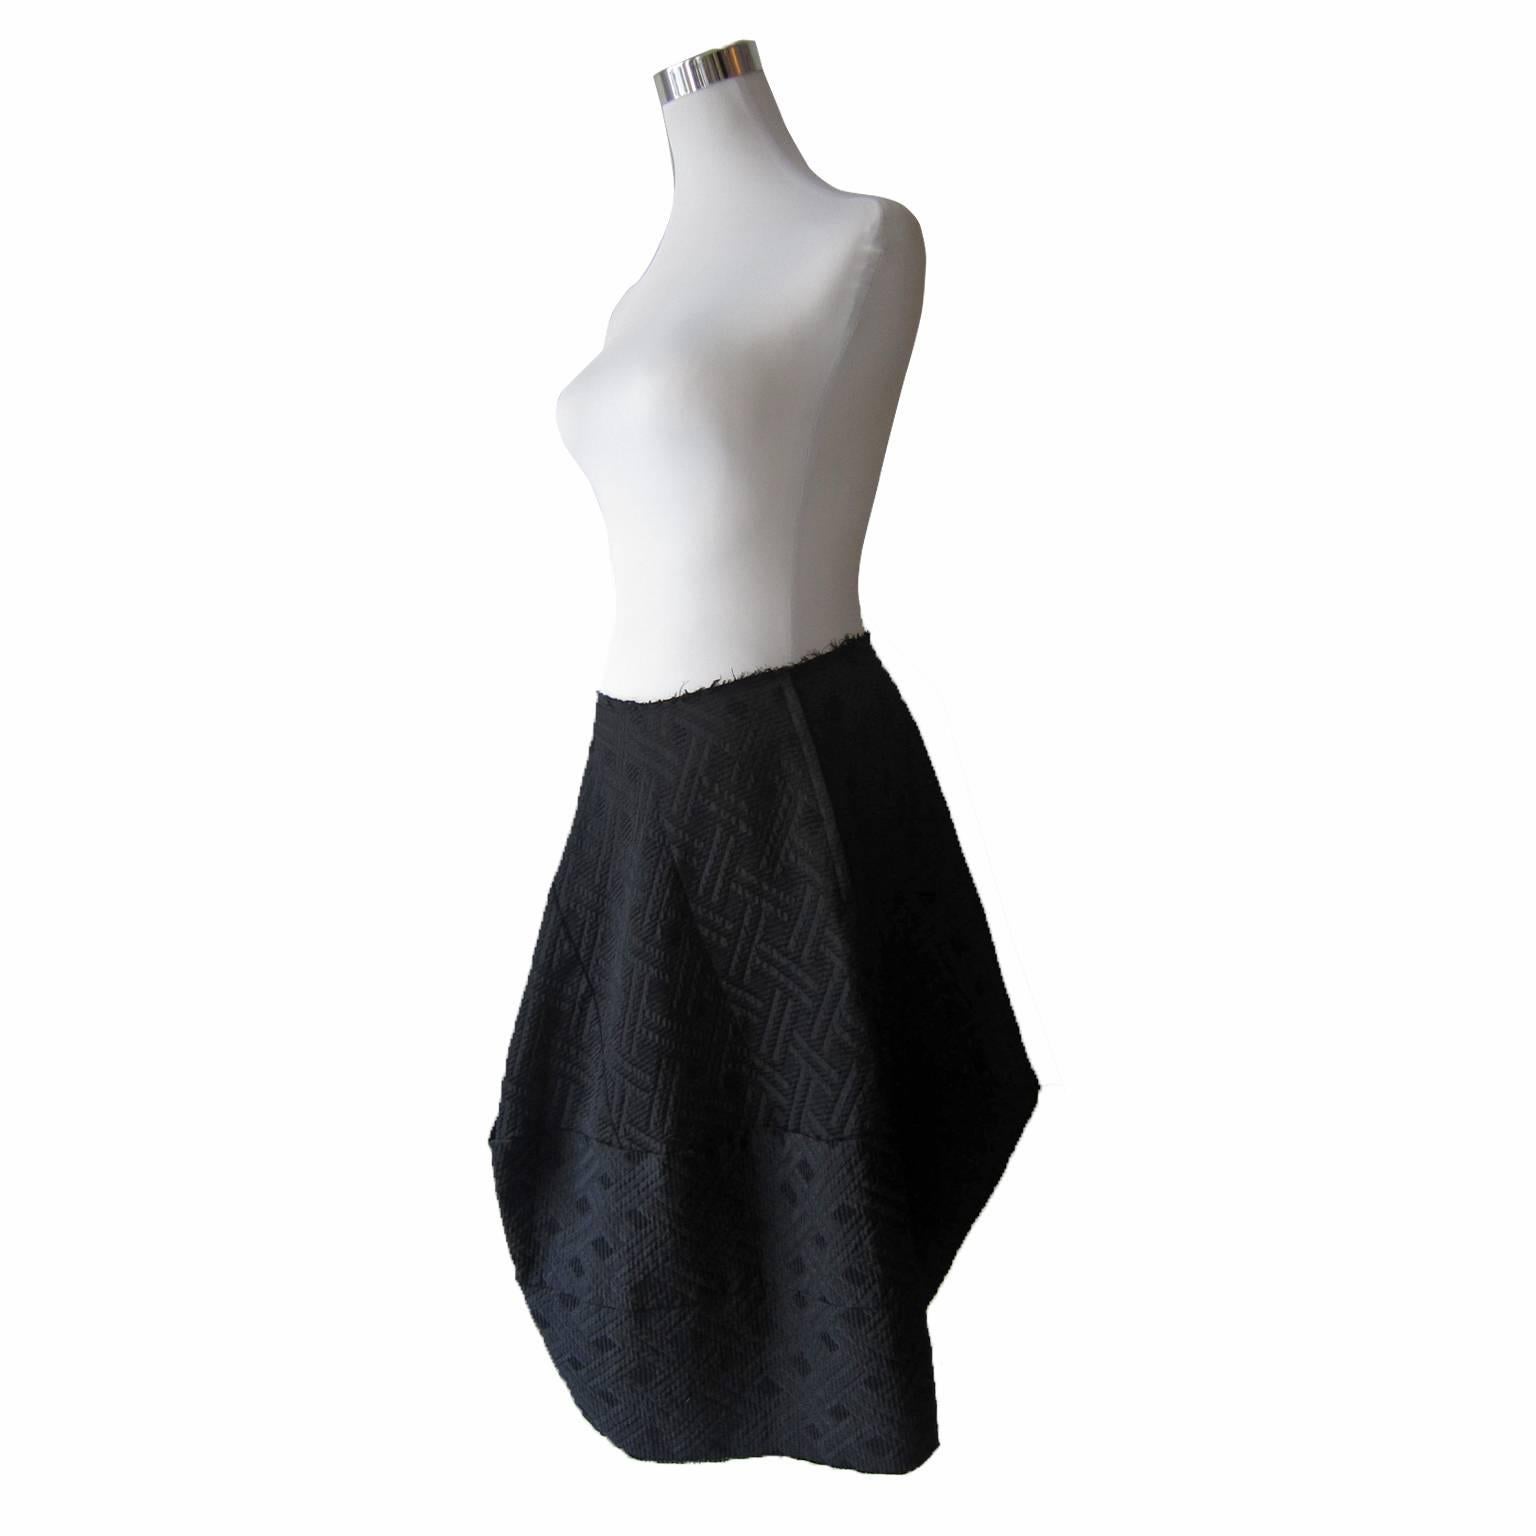 Comme des Garcons Mixed Fabric Black Skirt AD2006 1